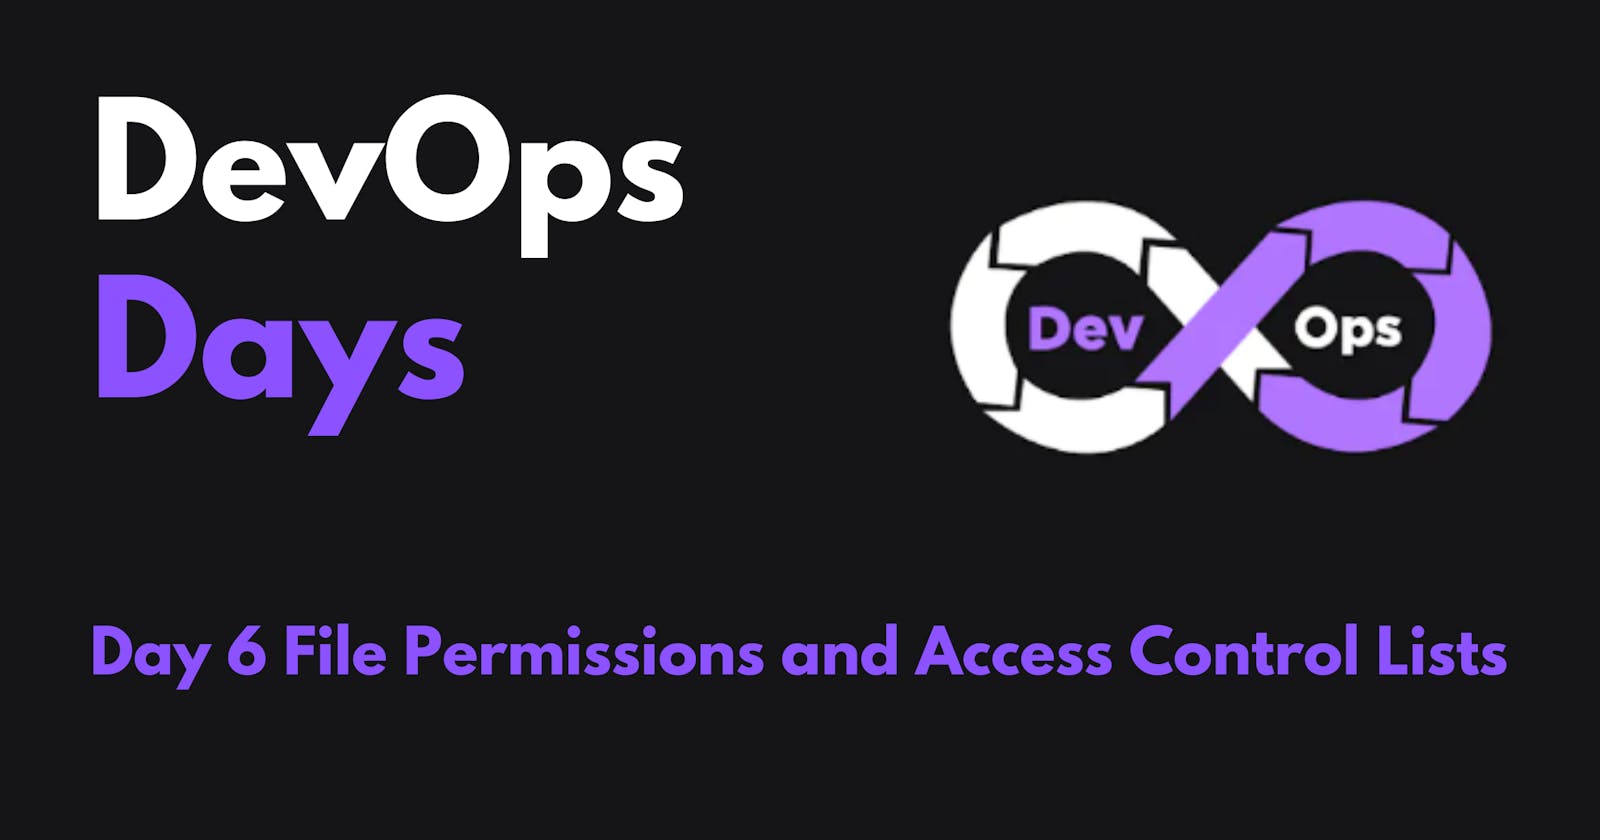 Day 6 File Permissions and Access Control Lists